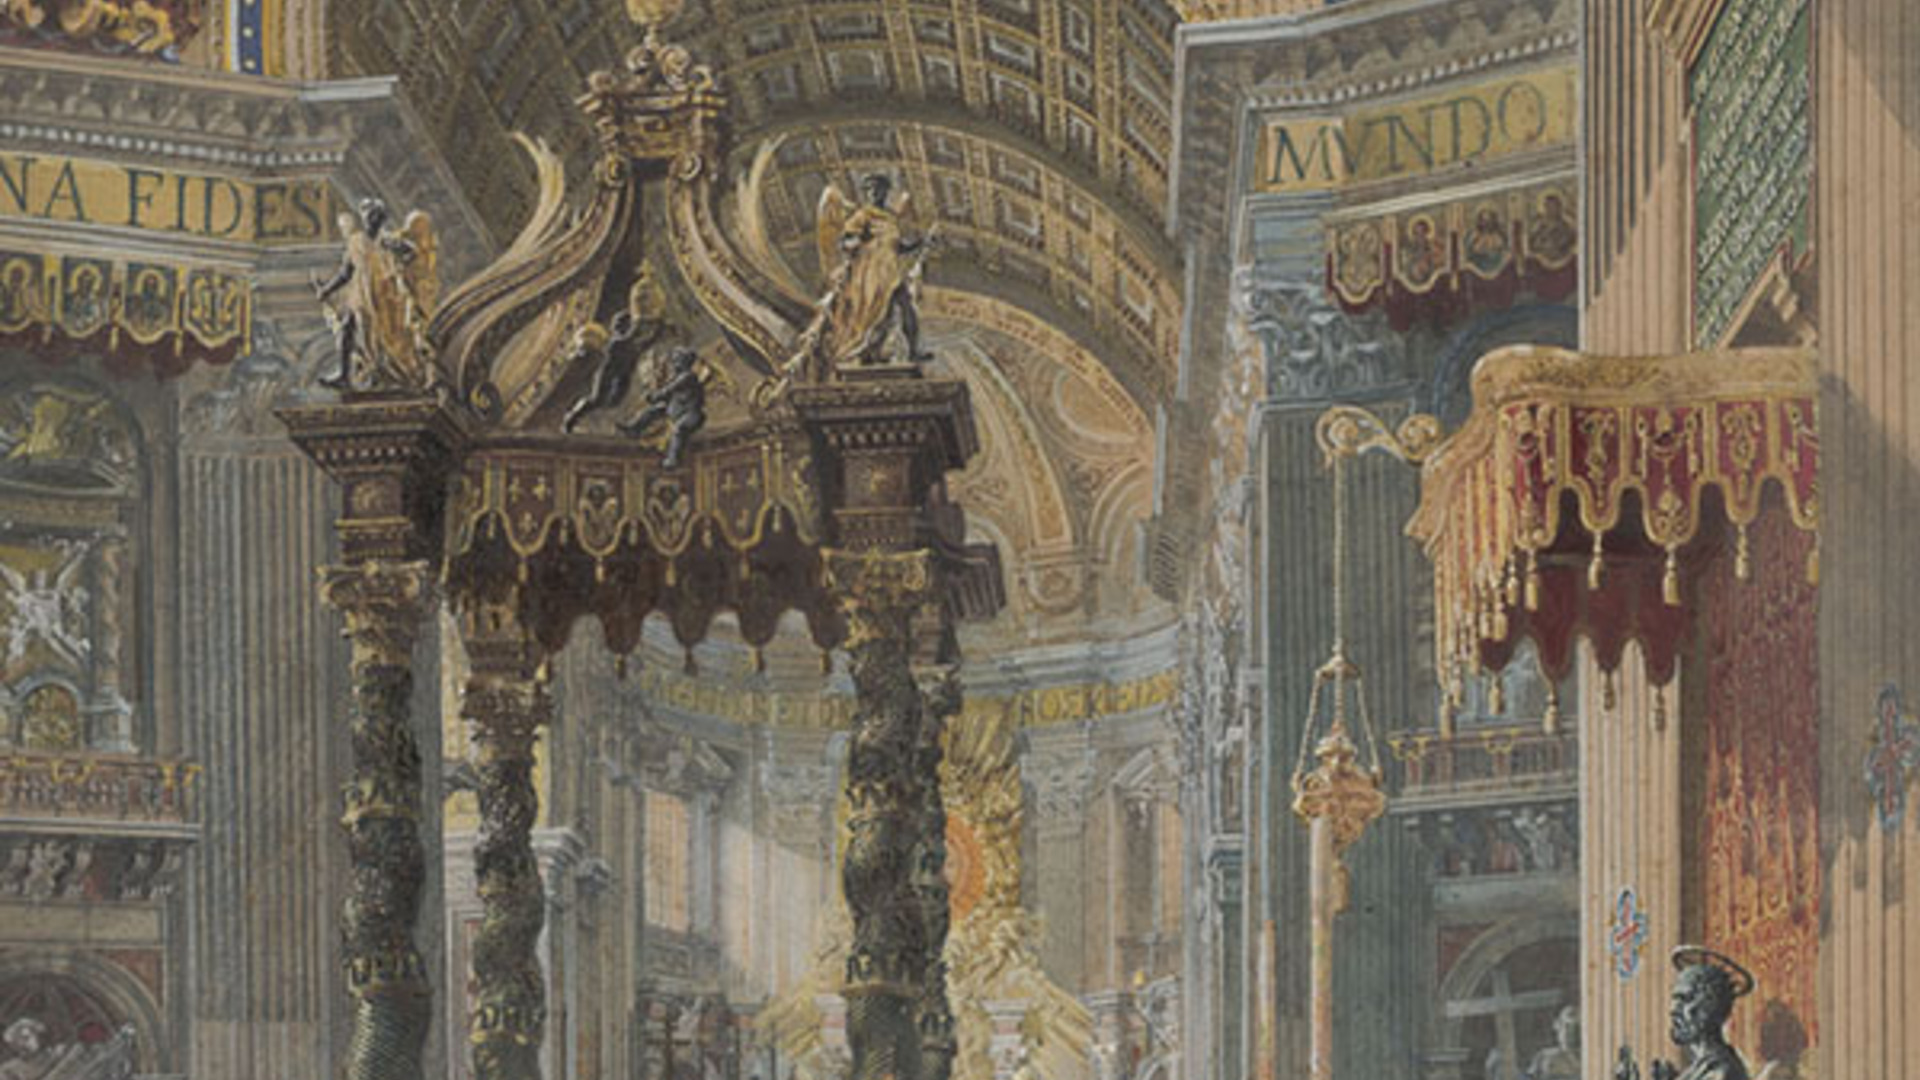 Martino Del Don (Italian, active 1896), <em>Interior of Saint Peter’s</em>, n.d. gouache on paper, 23 x 16 inches. Gift of Dr. and Mrs. Norval Green, 1975.090.002 (detail)